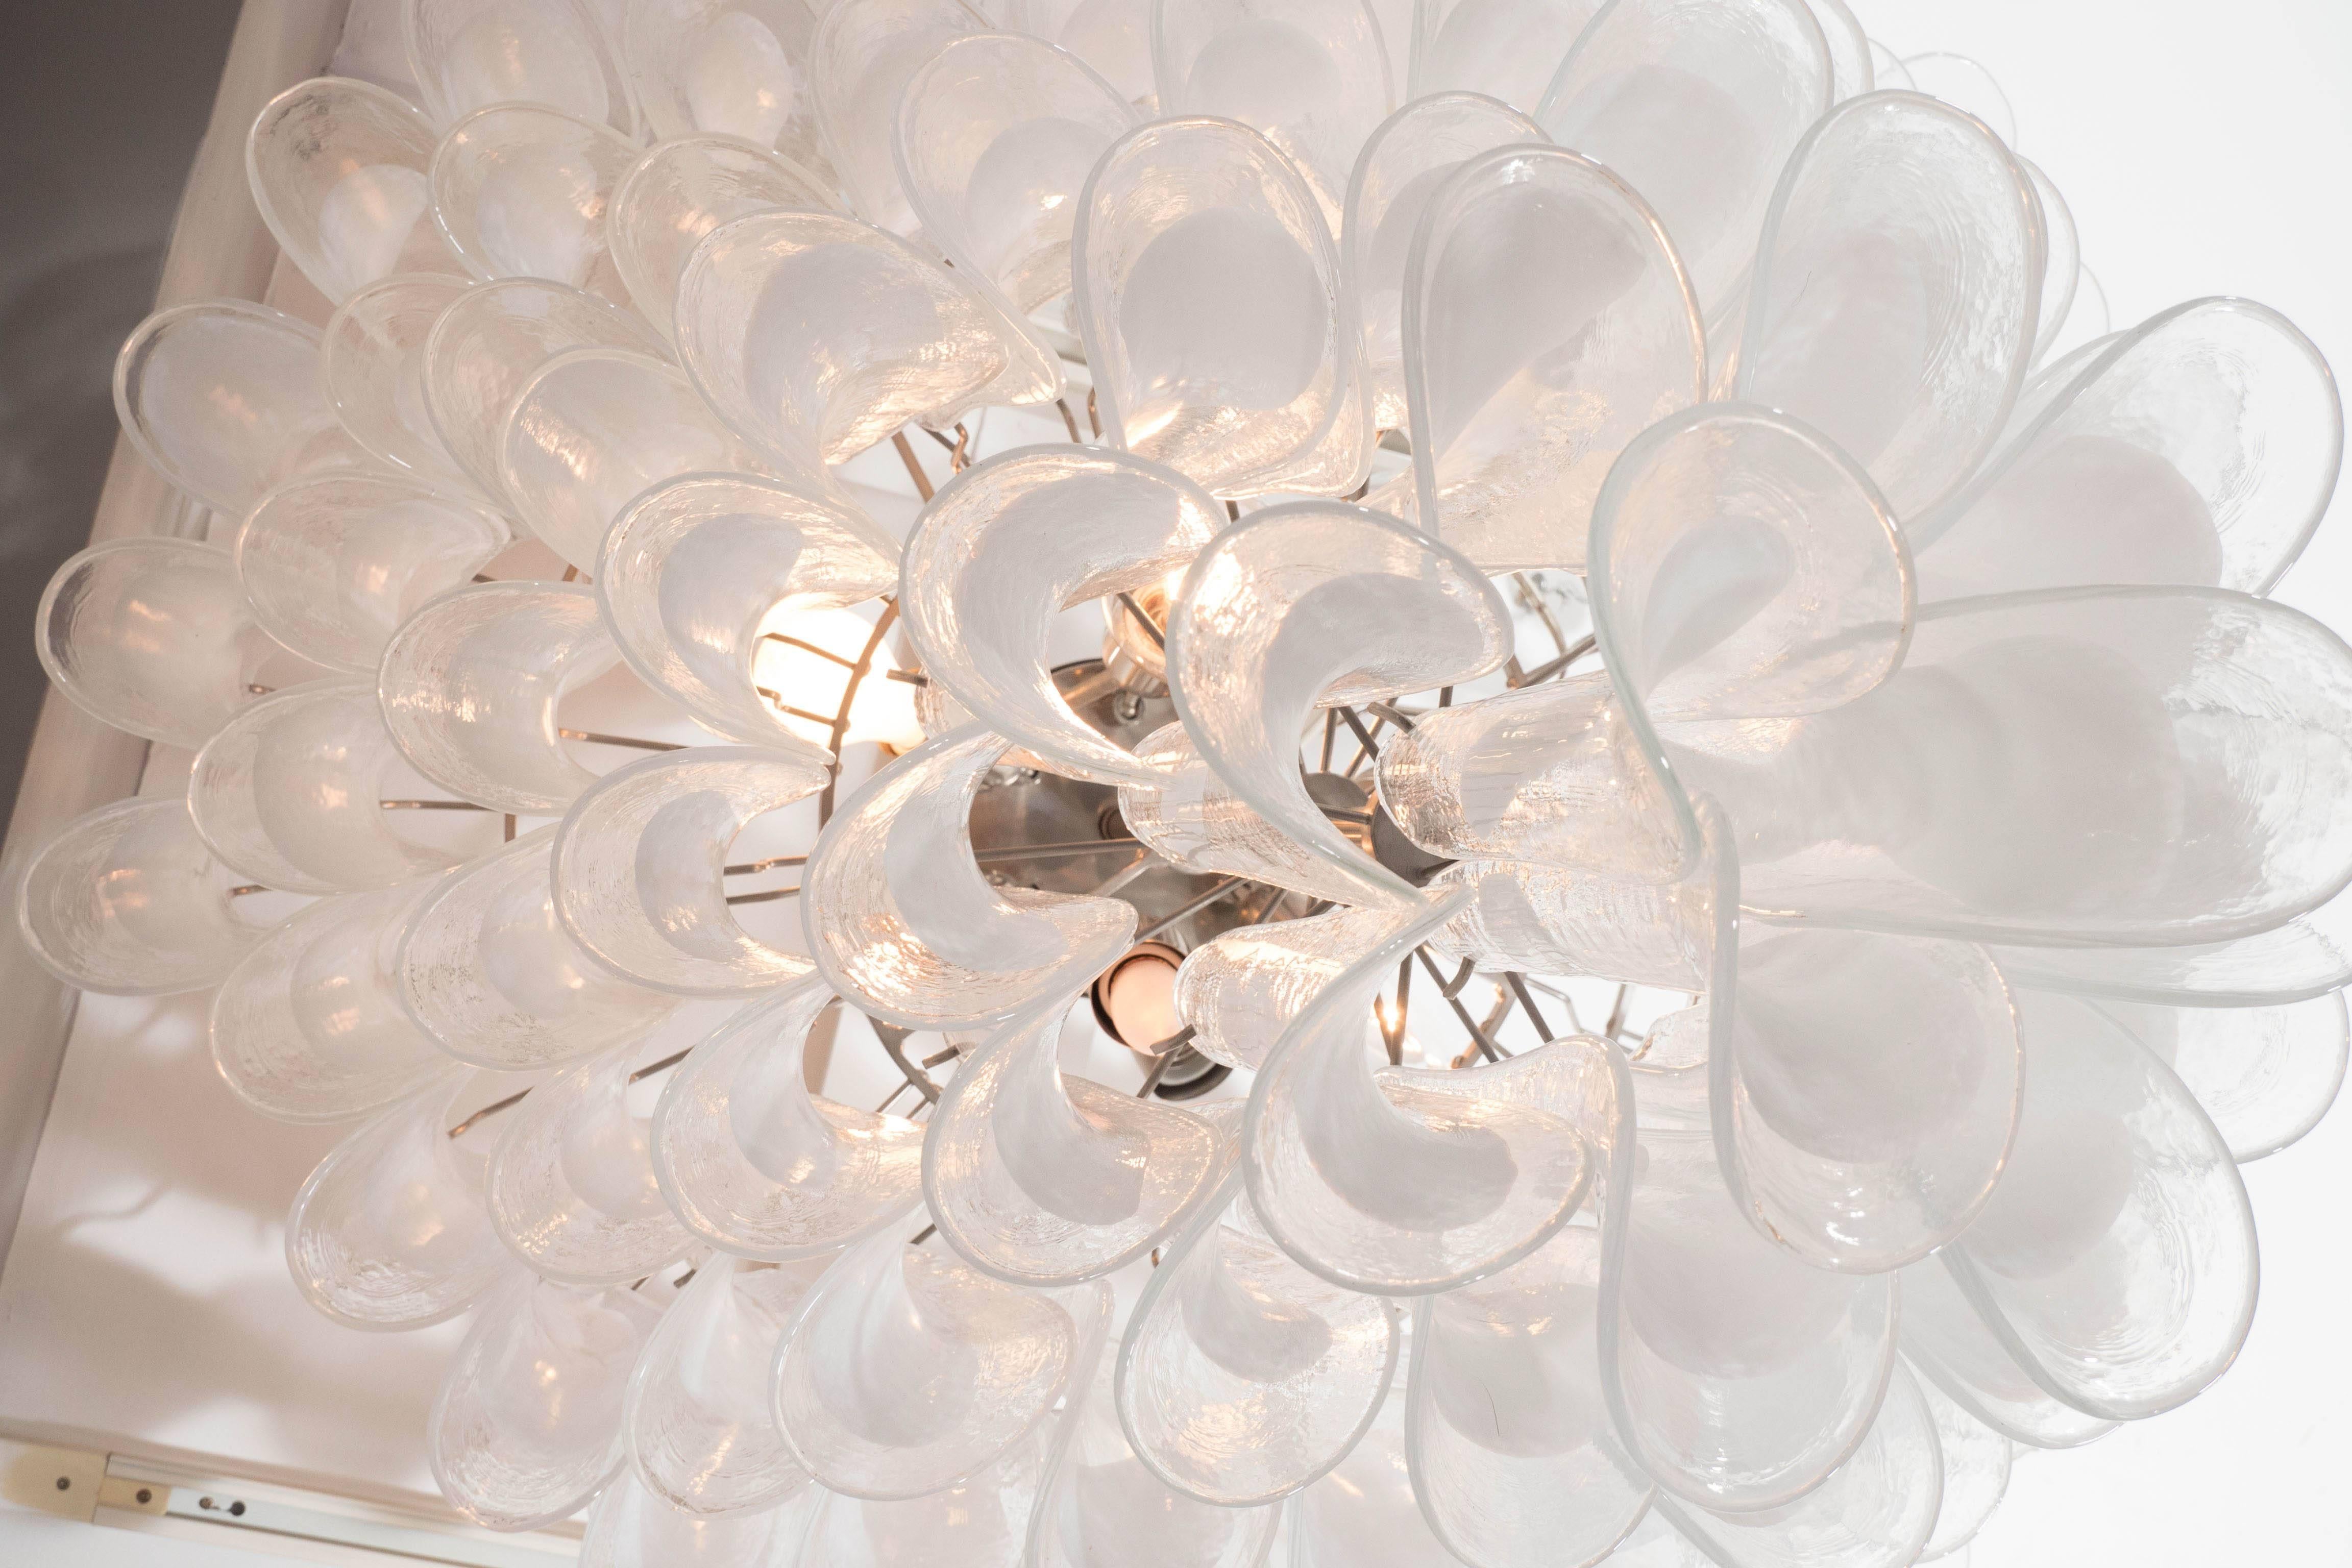 Murano Glass Huge Mazzega White and Clear Glass Petal Chandeliers, 2 of 2 (Remaining Balance)